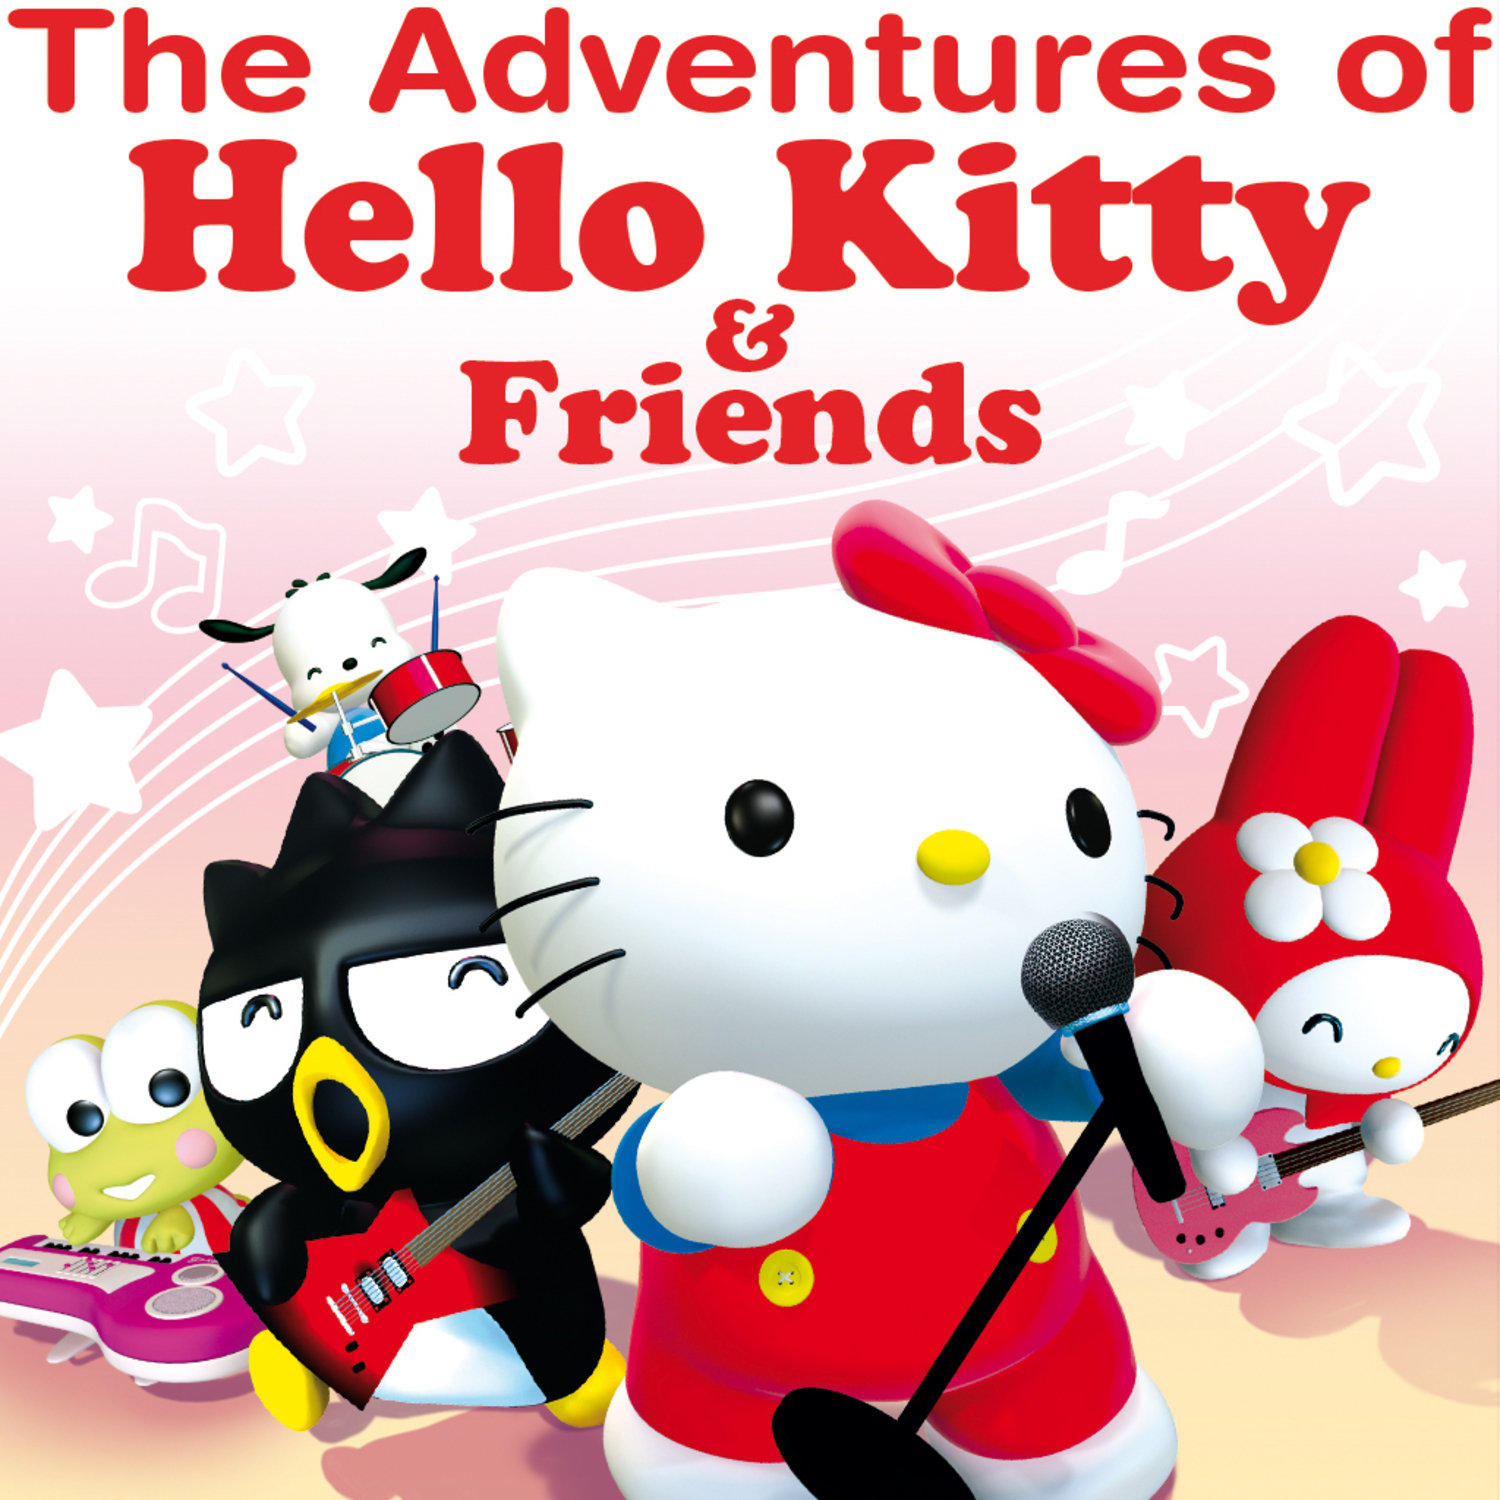 The Adventures of Hello Kitty & Friends Soundtrack from the Animated TV